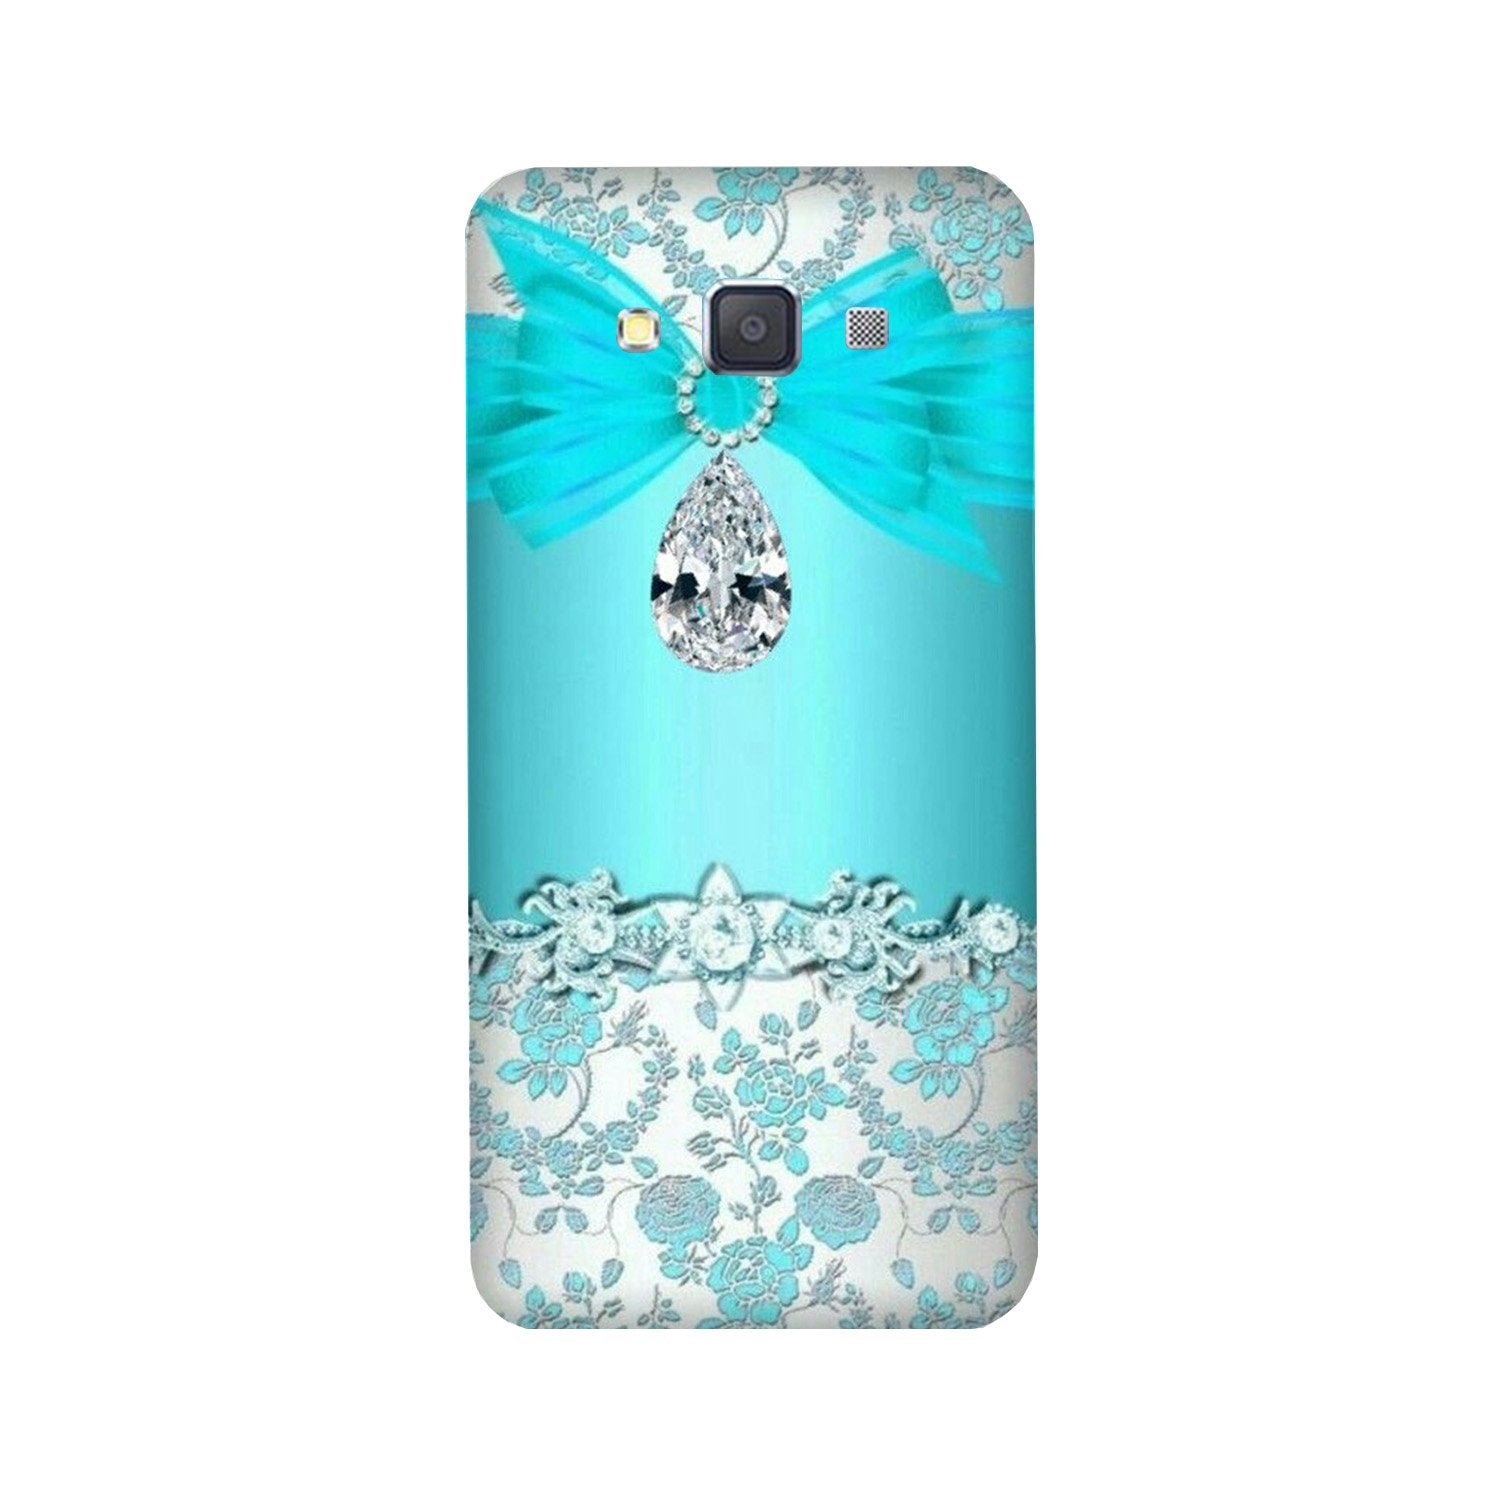 Shinny Blue Background Case for Galaxy A5 (2015)